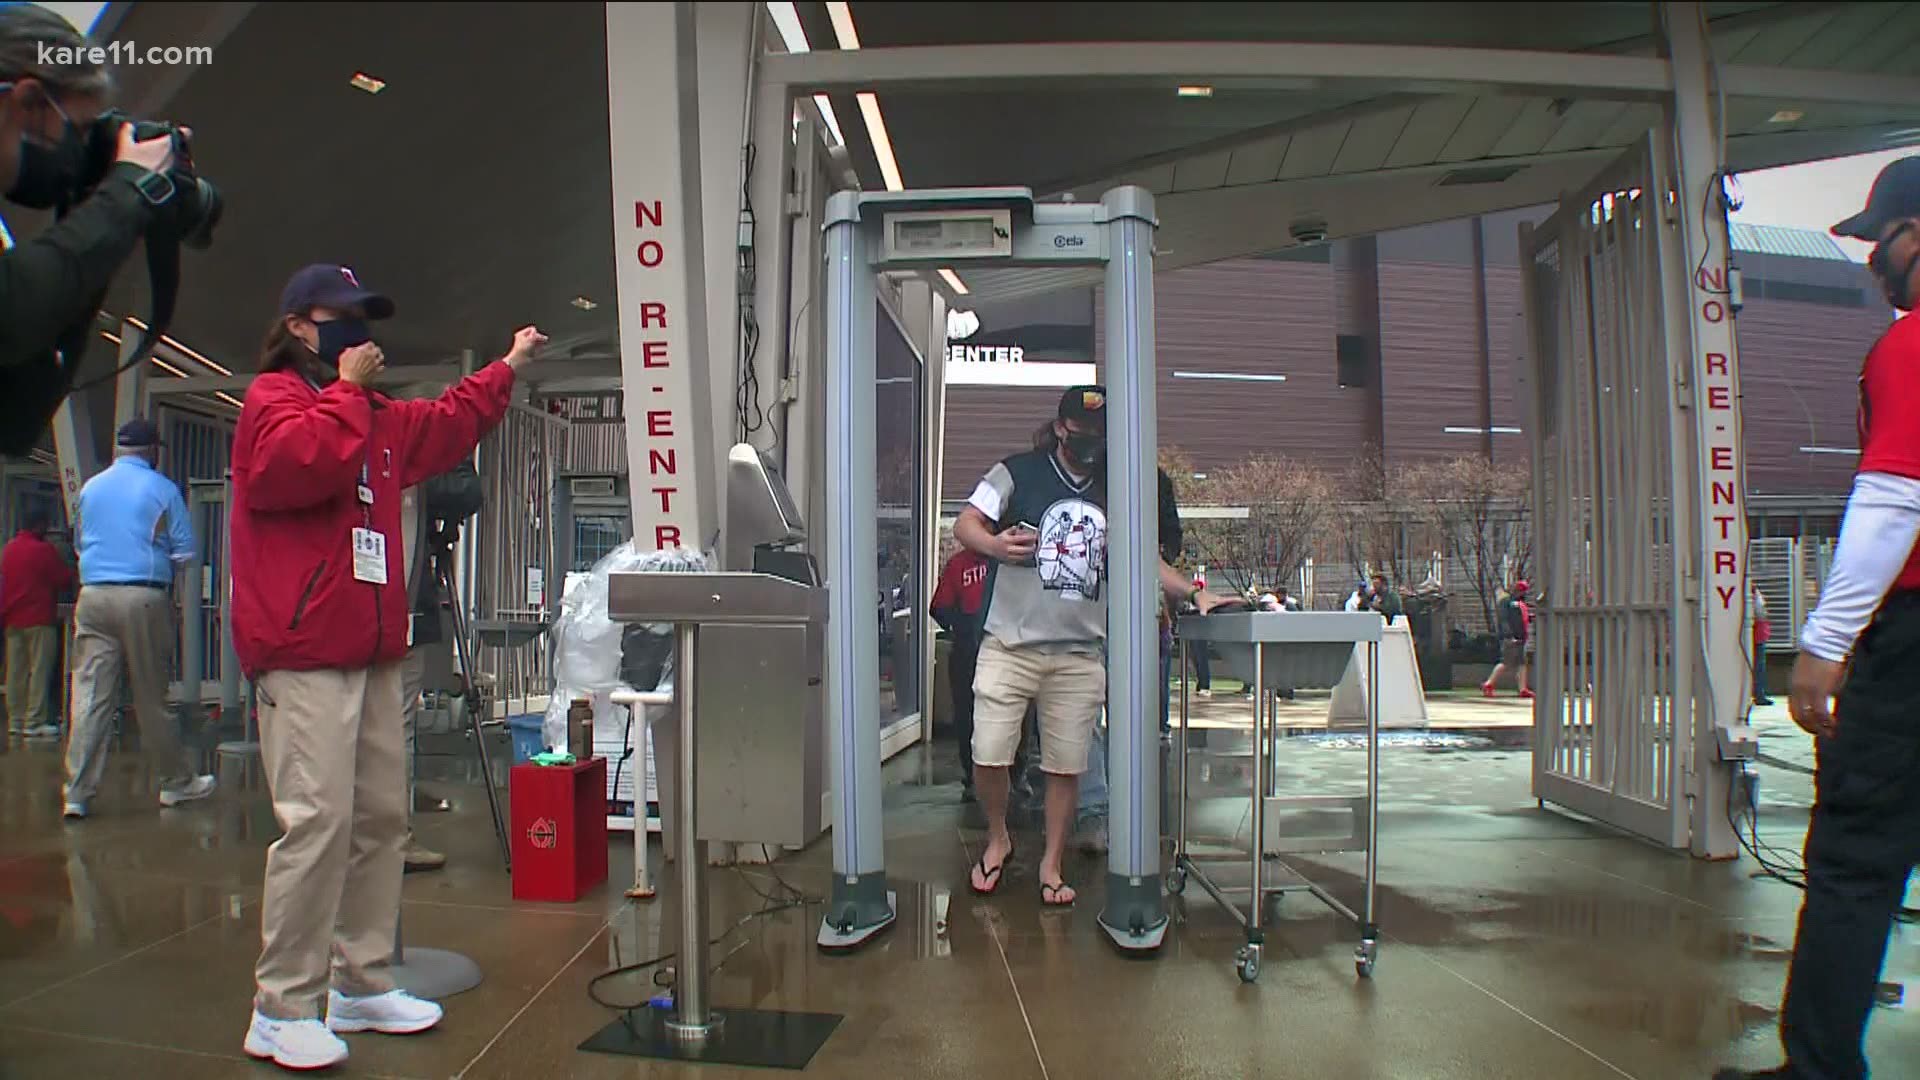 The Minnesota Twins welcomed 10,000 fans to Target Field for their home opener against the Seattle Mariners.